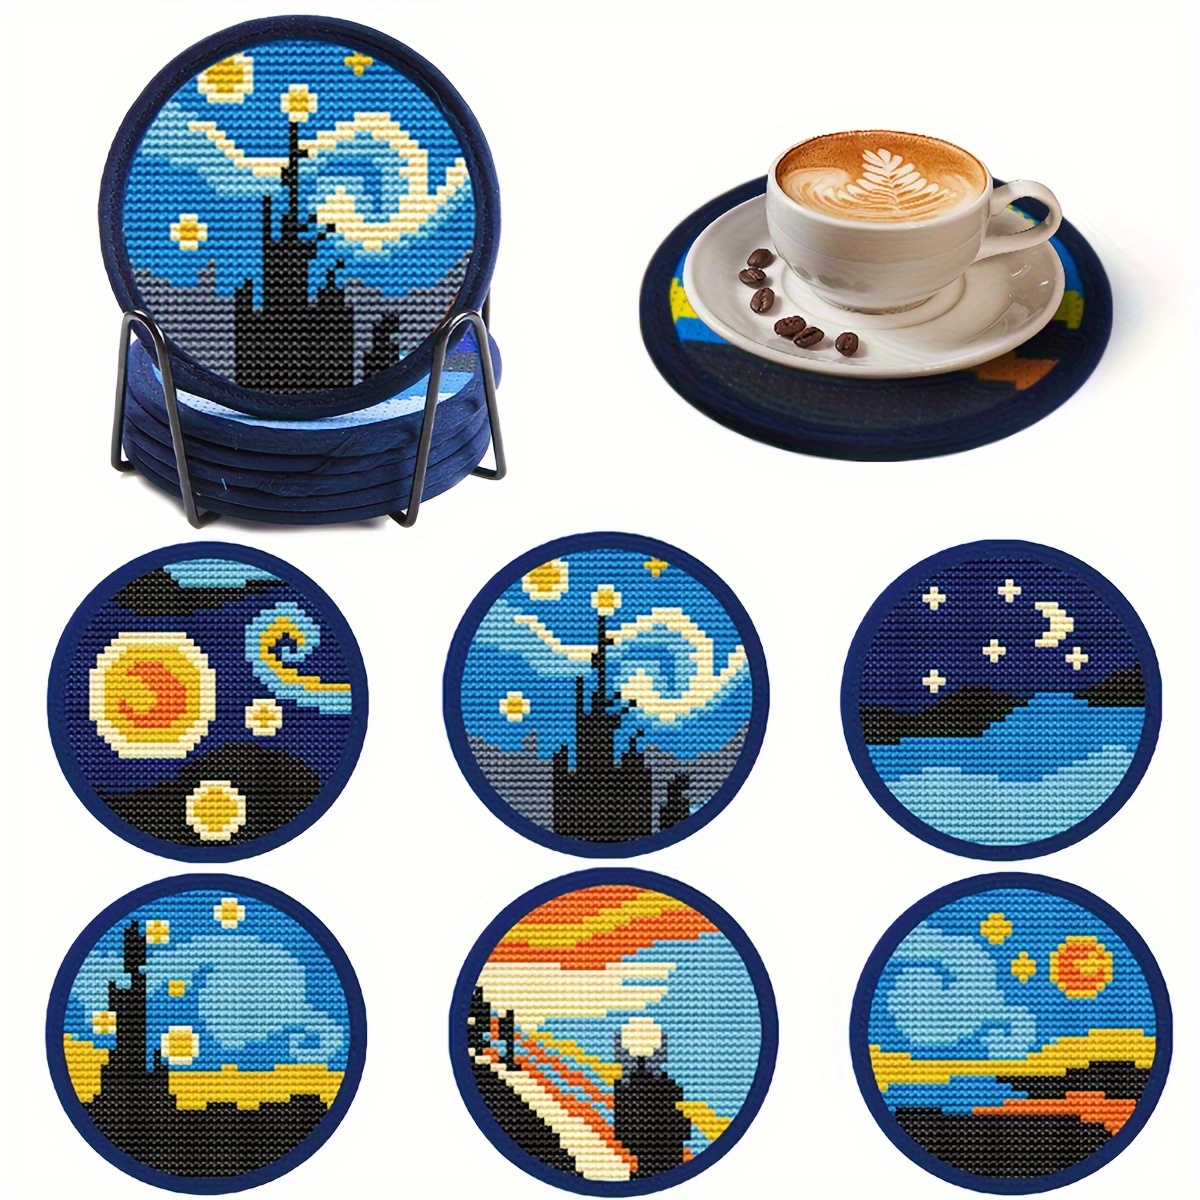 

6pcs, Cross Stitch Coaster Kits, Embroidery Coasters For Drinks, Diy Art Craft Supplies, Cup Mat Protection For Kitchen & Dining, Round Needlework Coasters For Beginners & Adults